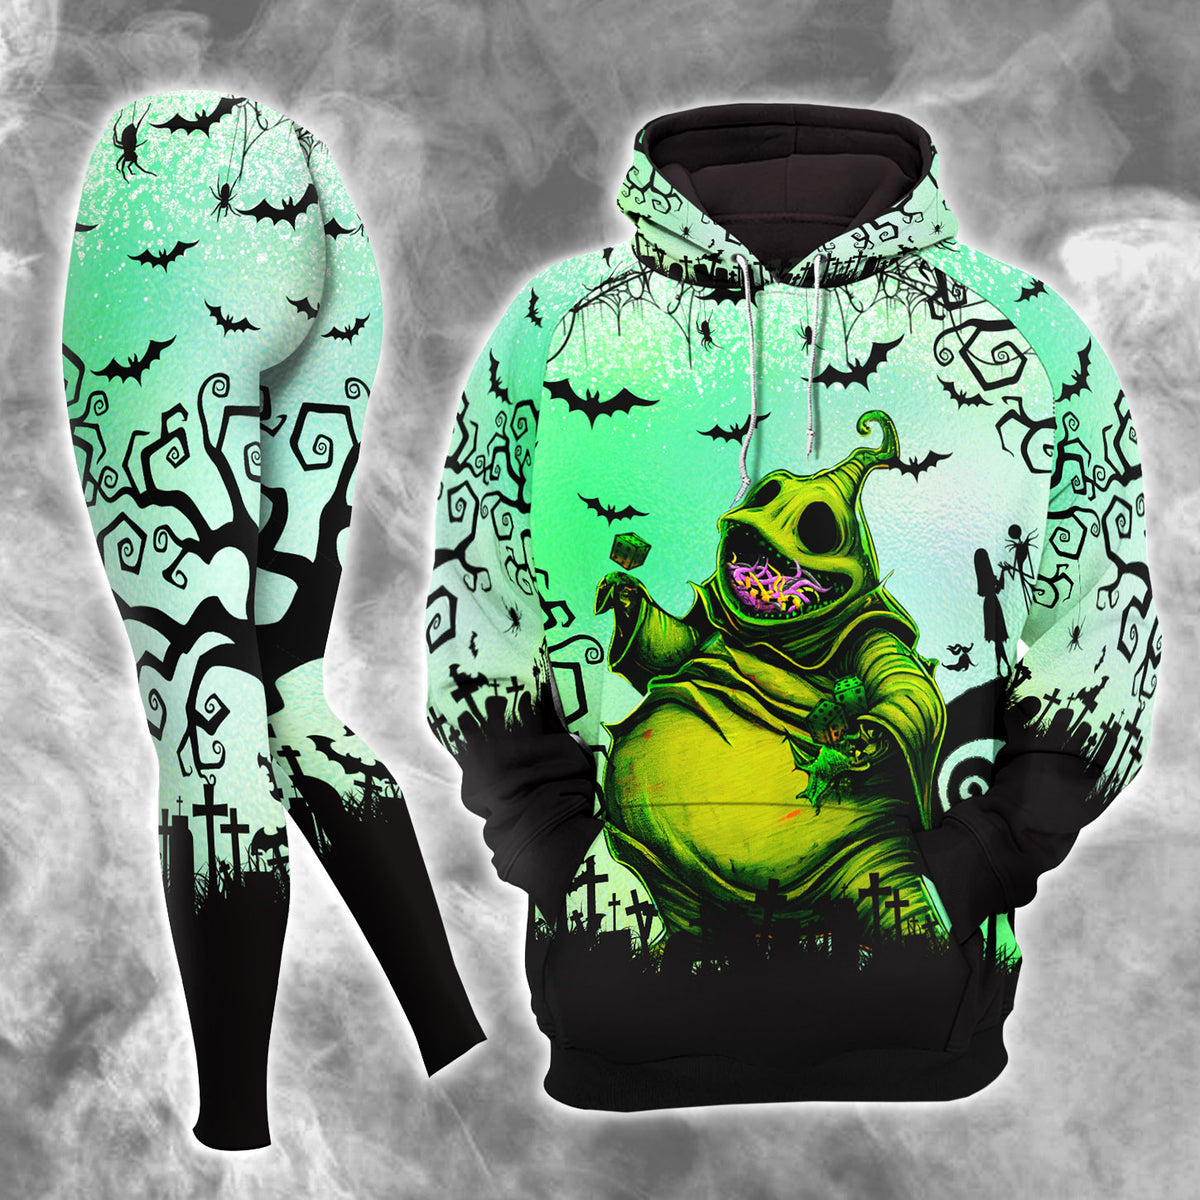 Green Nightmare Theme Art Combo Hoodie and Leggings - Dark and edgy matching set with skull designs for a unique and stylish look